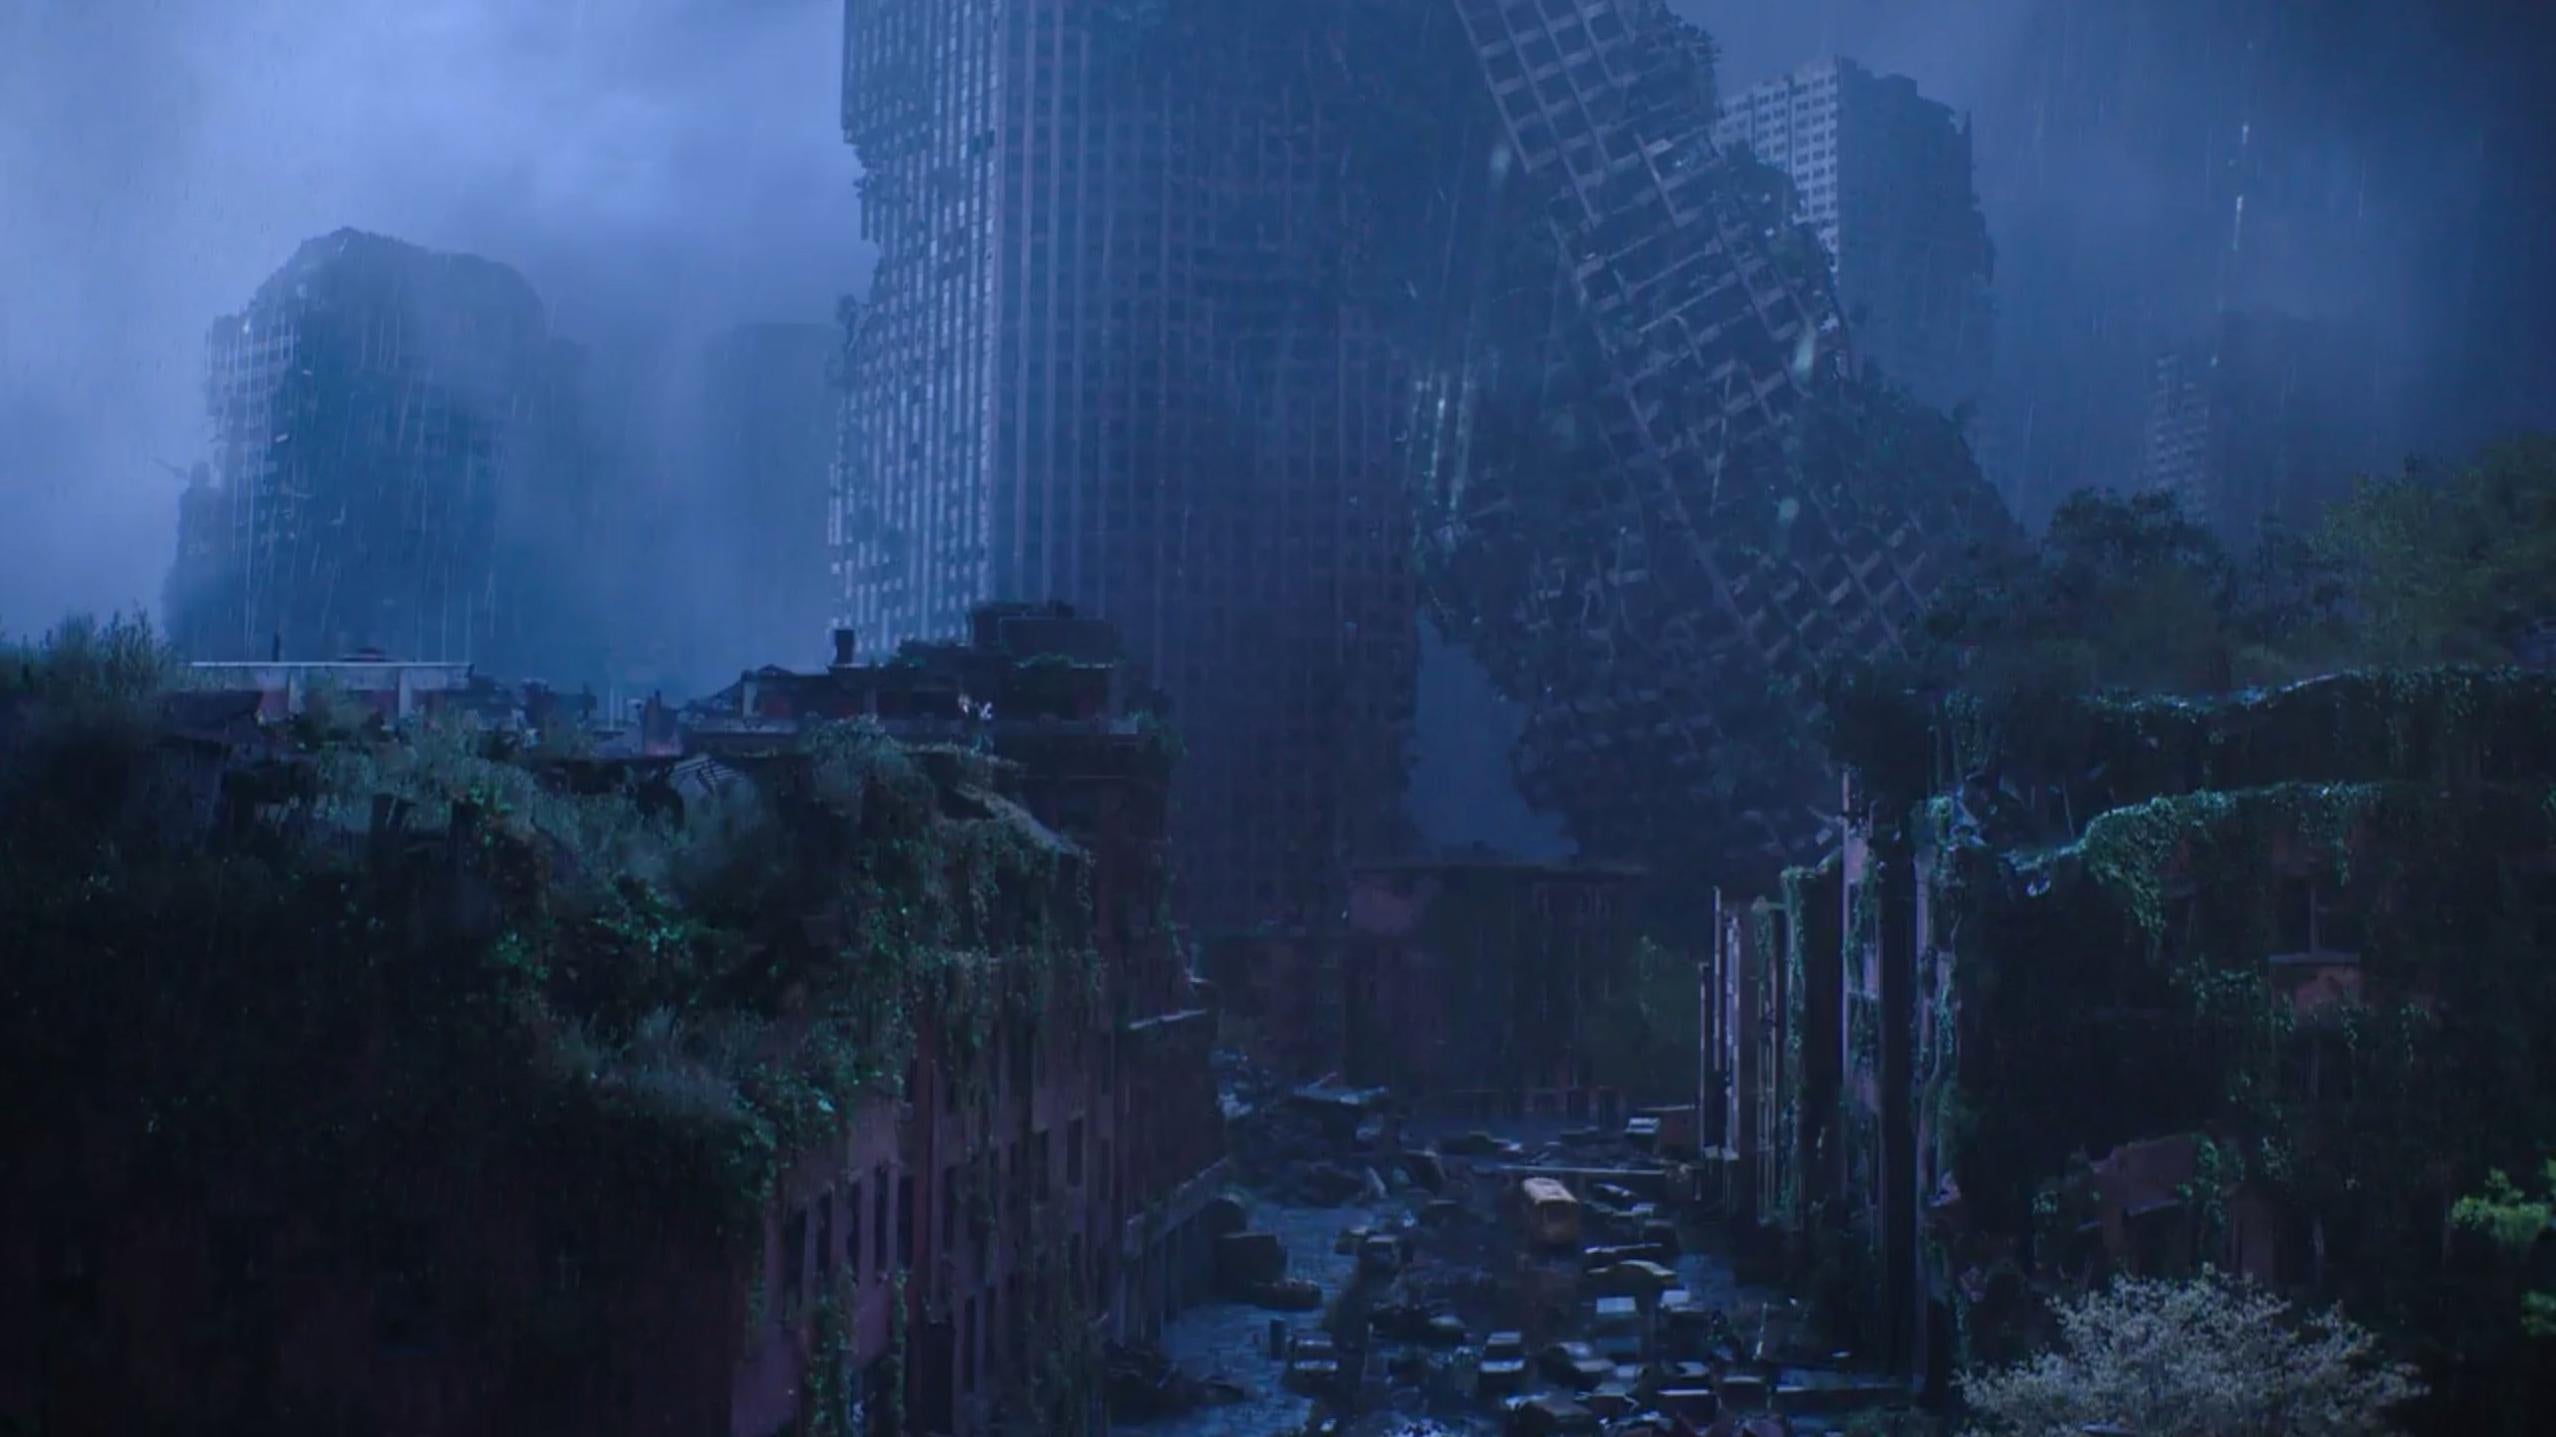 And here's the leaning skyscraper image as it appears in the final moments of the first episode. (Screenshot: HBO)